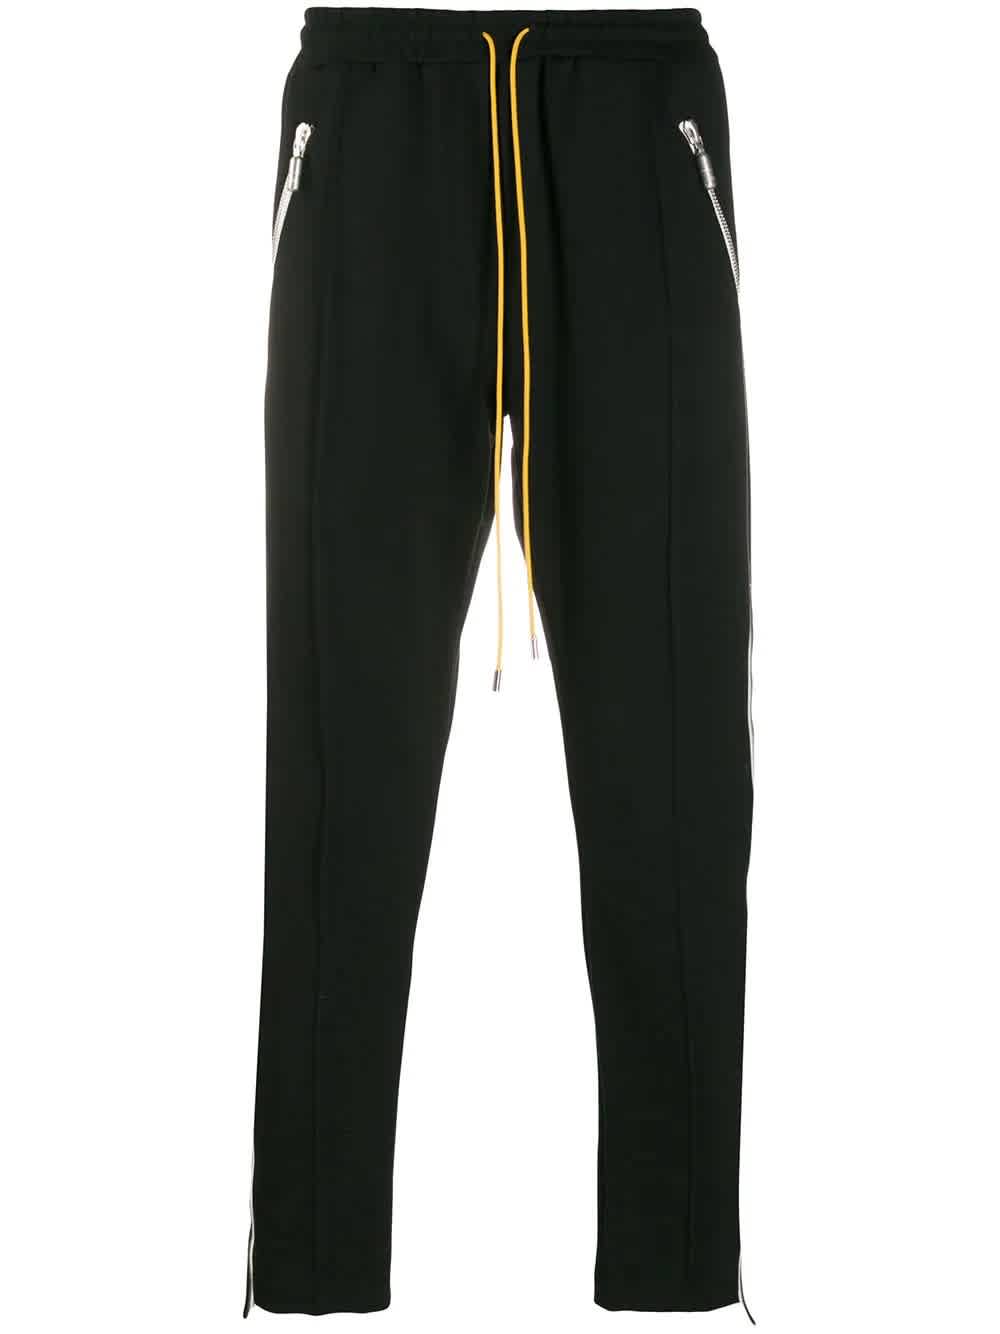 black pants with green side stripe